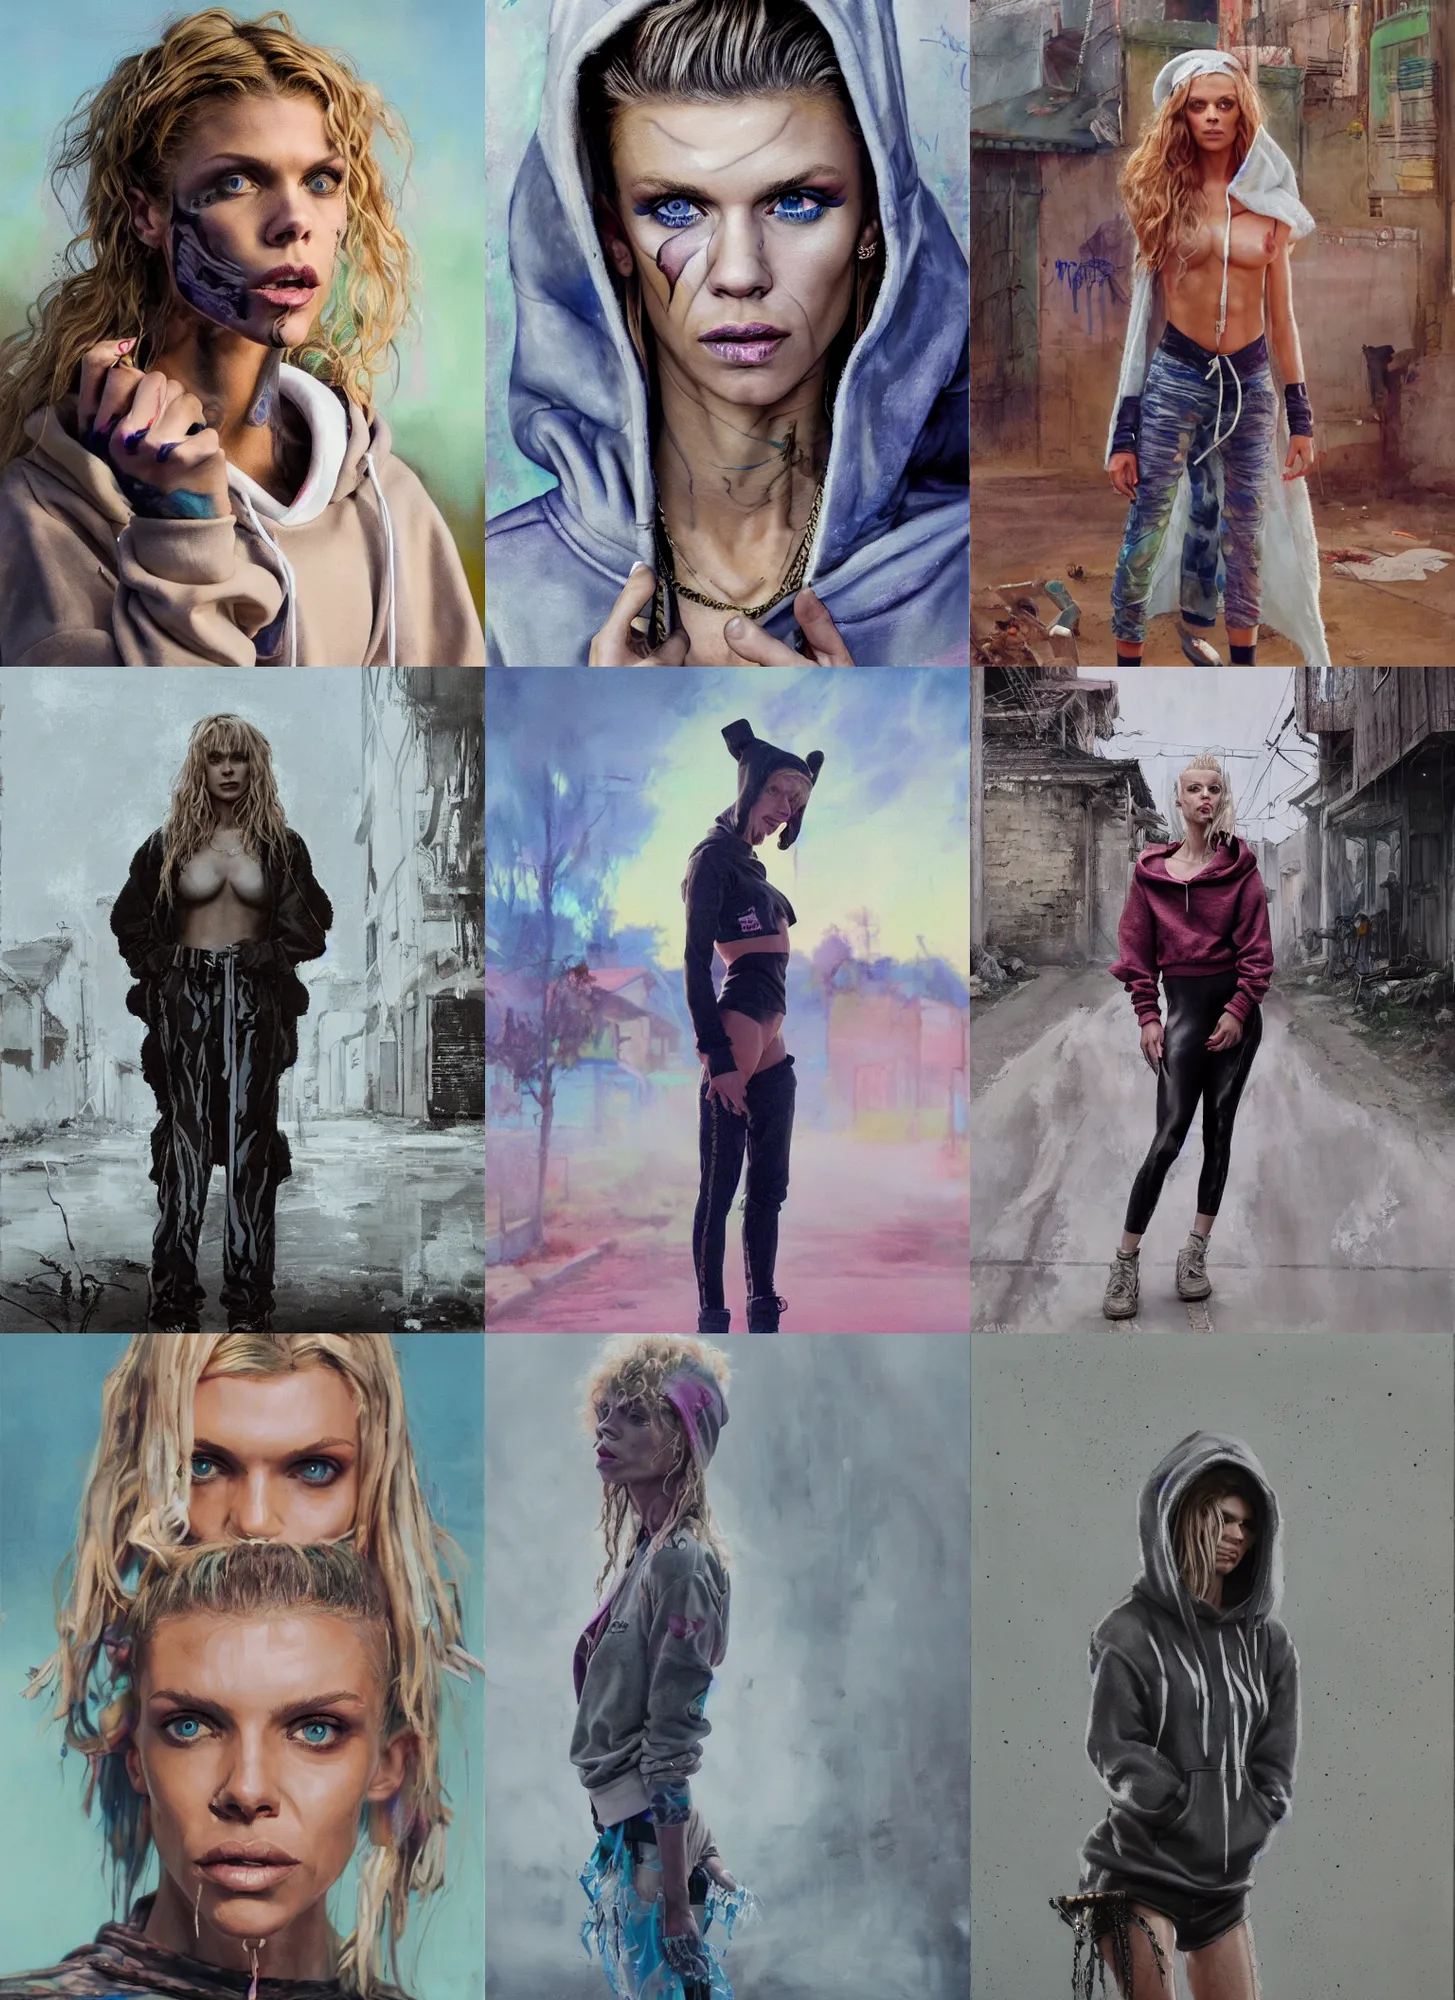 Prompt: still from music video of annalynne mccord from die antwoord standing in a township street, wearing a hoodie, street clothes, full figure portrait painting by martine johanna, earl norem, wadim kashin, pastel color palette, 2 4 mm lens